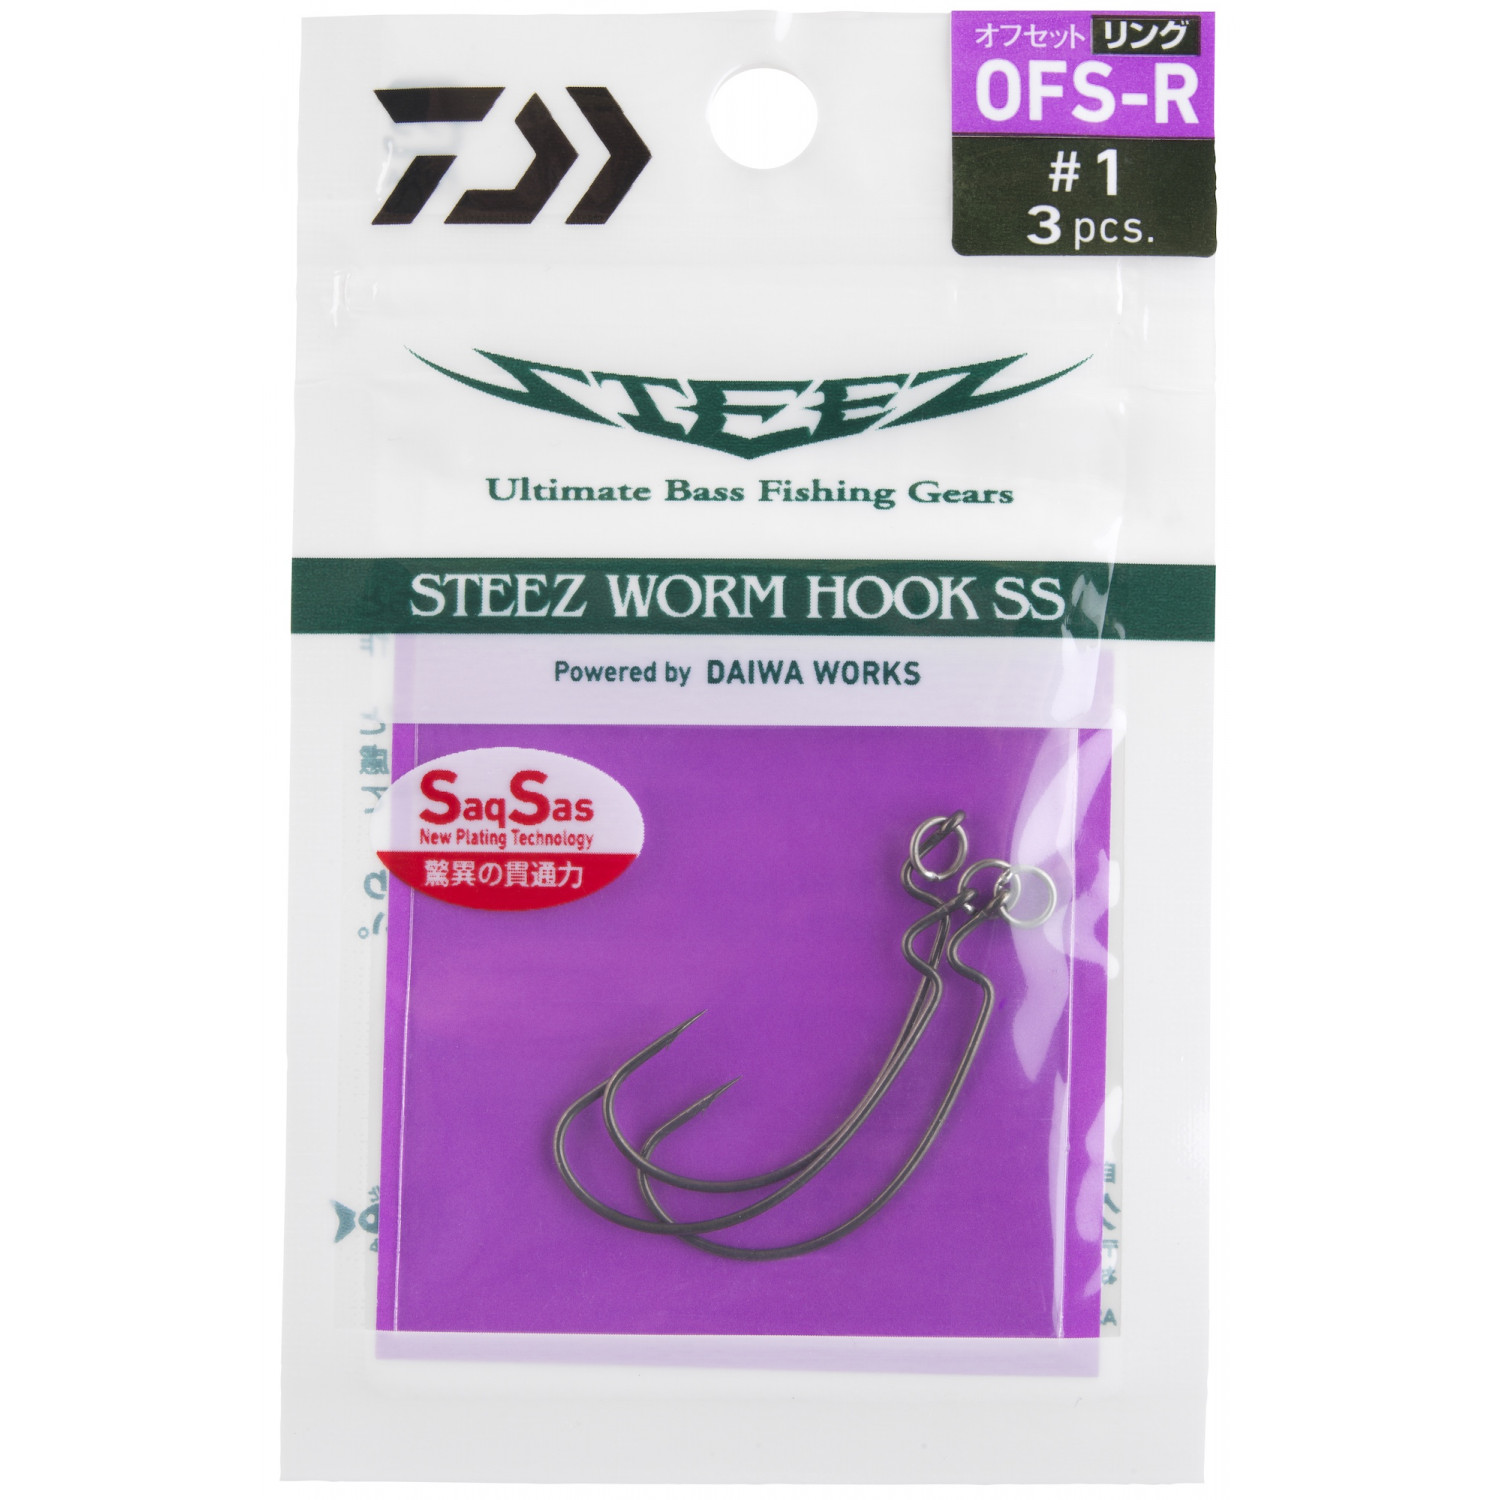 Steez Worm Hook SS Offset Ring